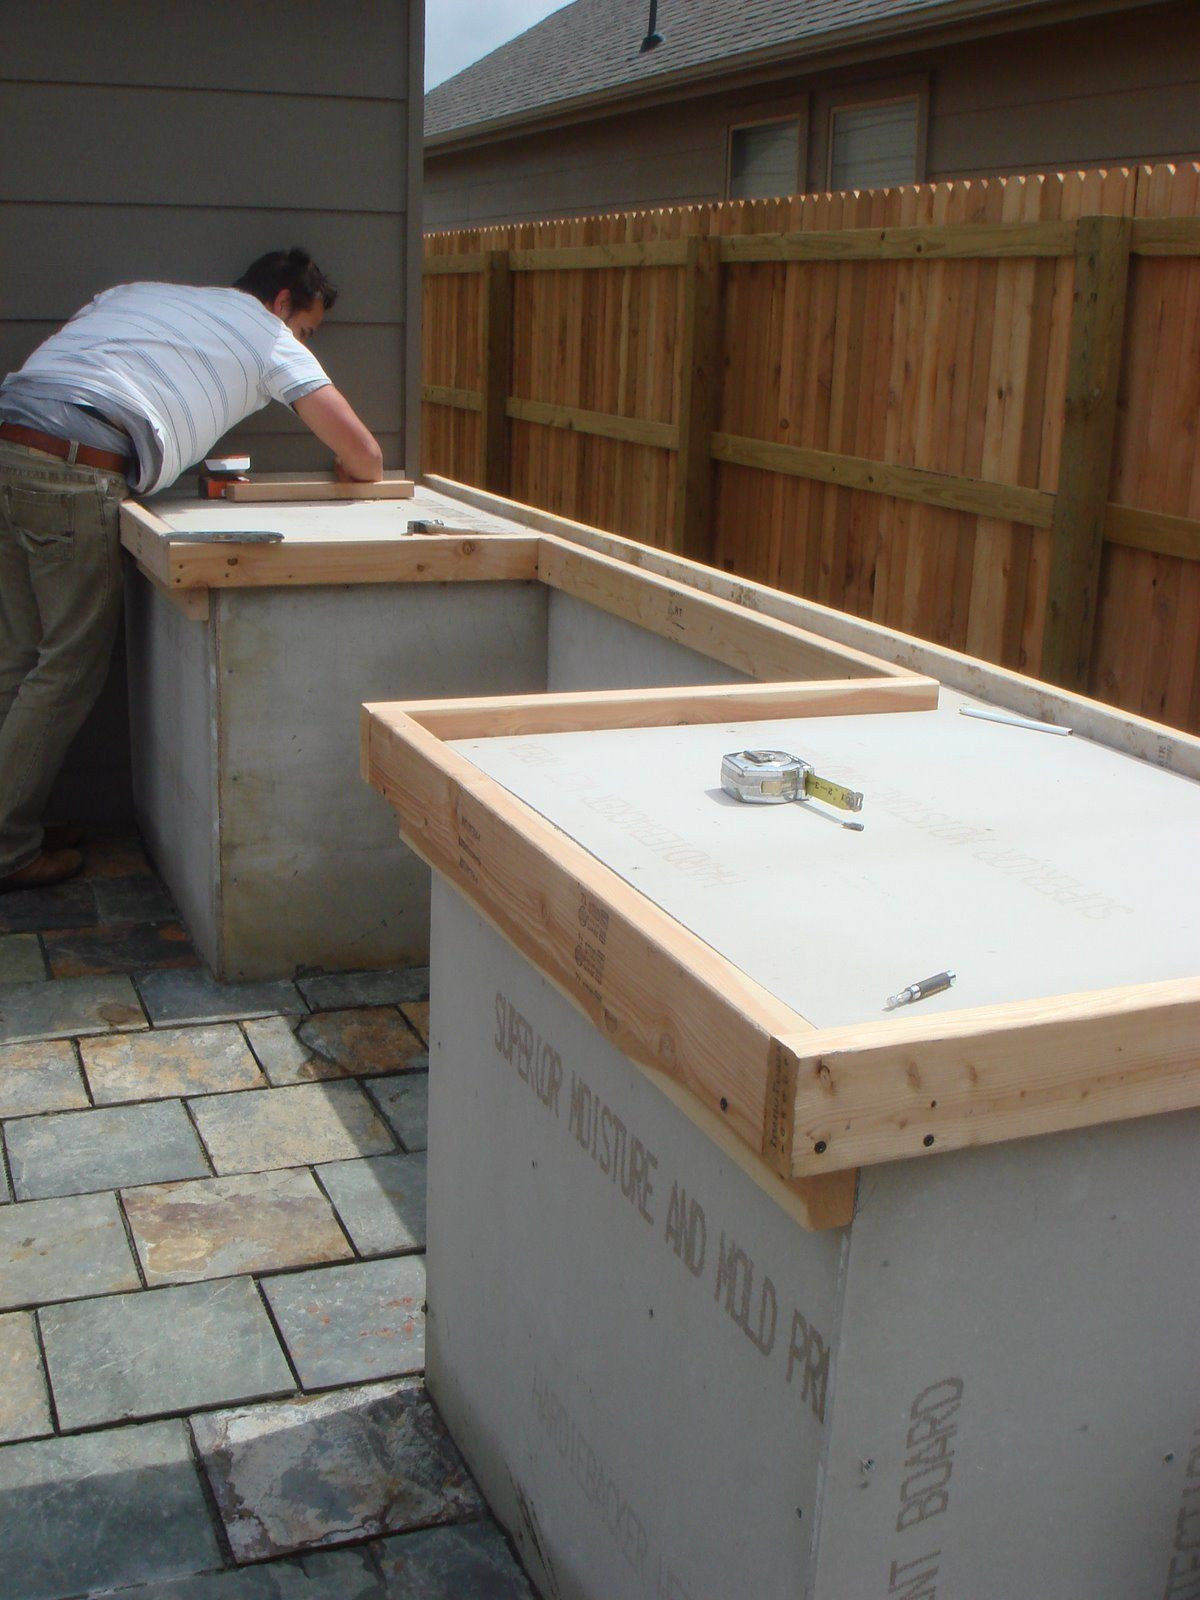 DIY Outdoor Concrete Countertops
 How to Build Outdoor Kitchen Cabinets